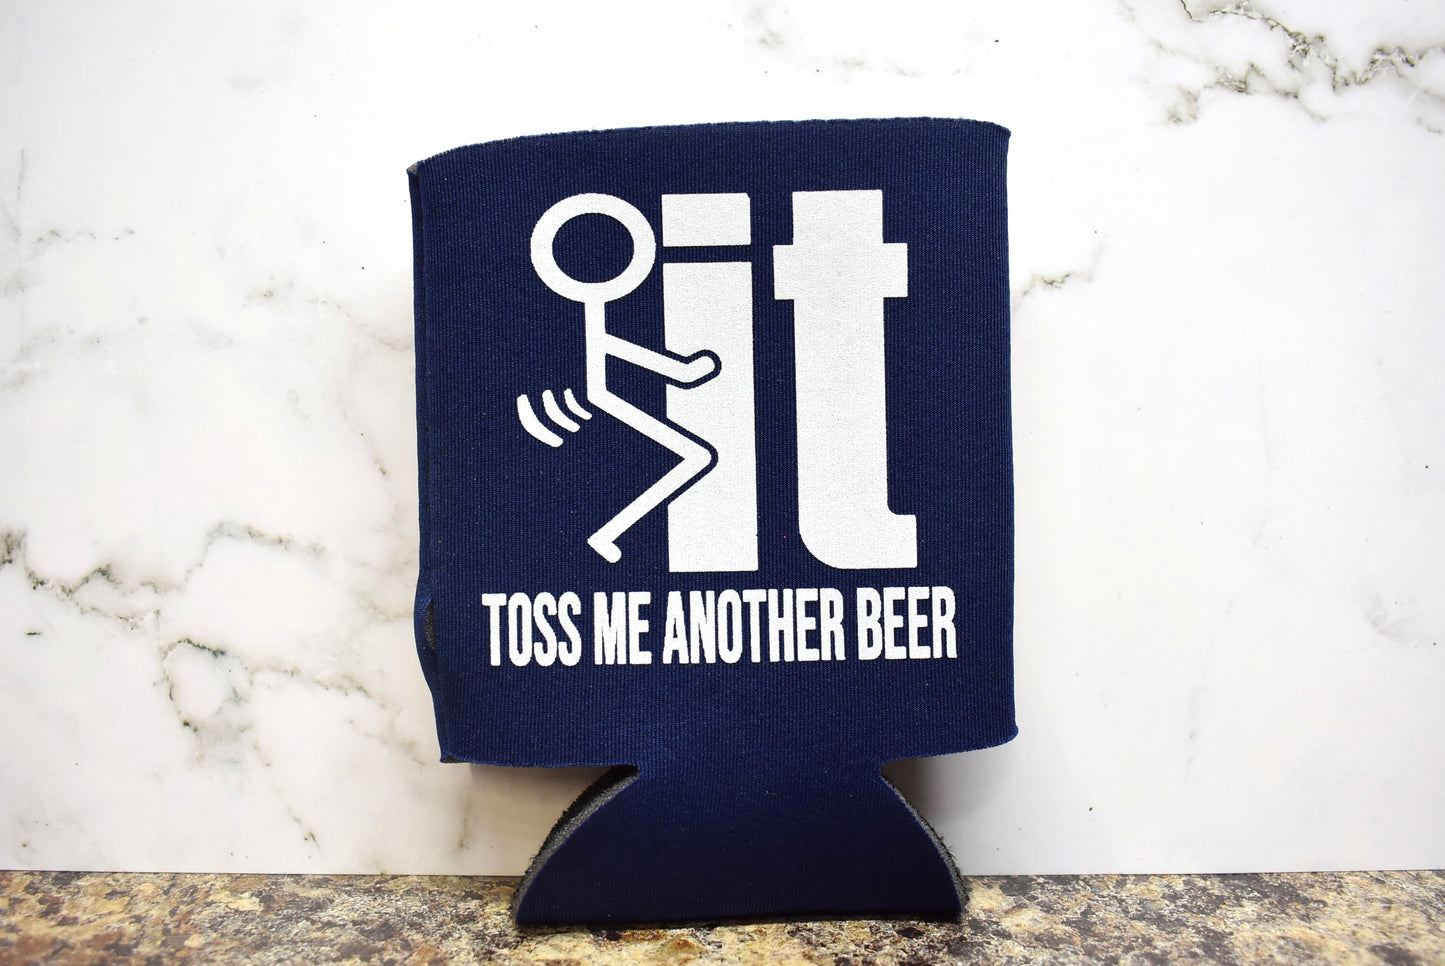 Can Koozie Blue Foam With Classic "F" It Image & Toss Me Another Beer